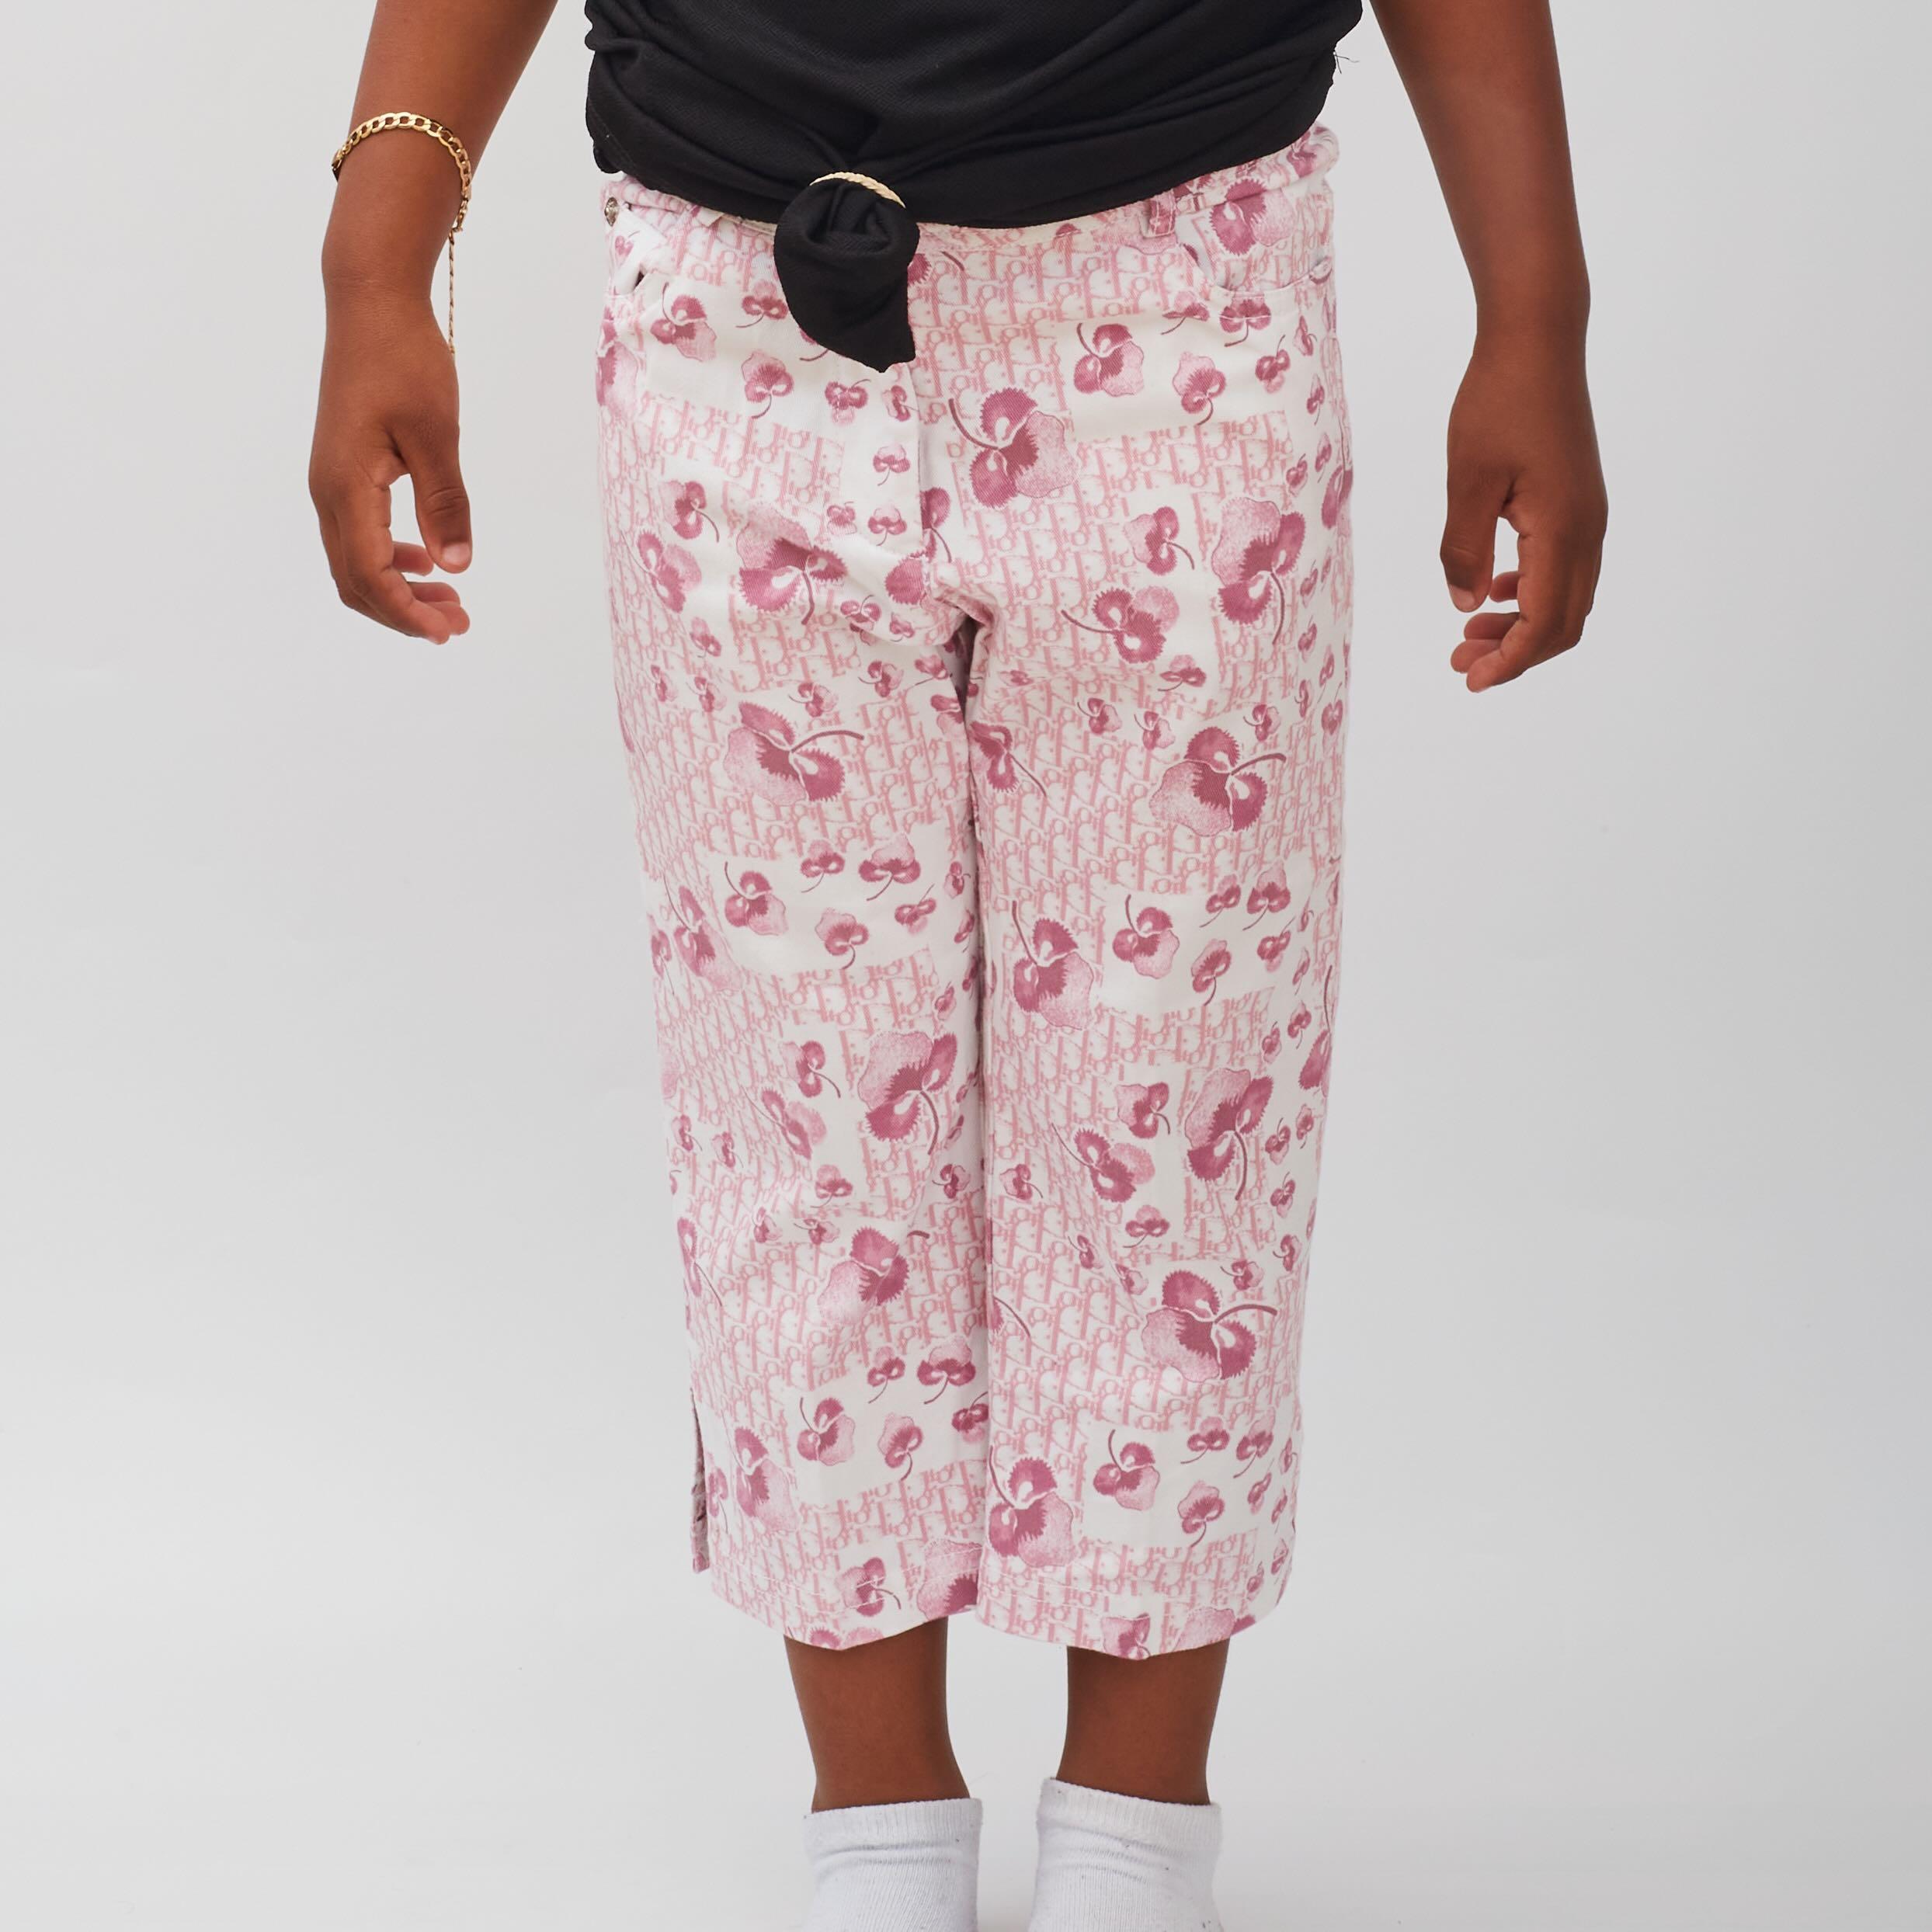 Rare 1990s Christian Dior pink pants with Trotter monogram print and flower print. Designed by John Galliano, circa 1990s.

COLOR: Pink/white
MATERIAL: Cotton

SIZE: 8A

MEASURES
Waist: 23”
Rise: 8”
Inseam: 14”
Leg Opening: 11”

CONDITION: Excellent